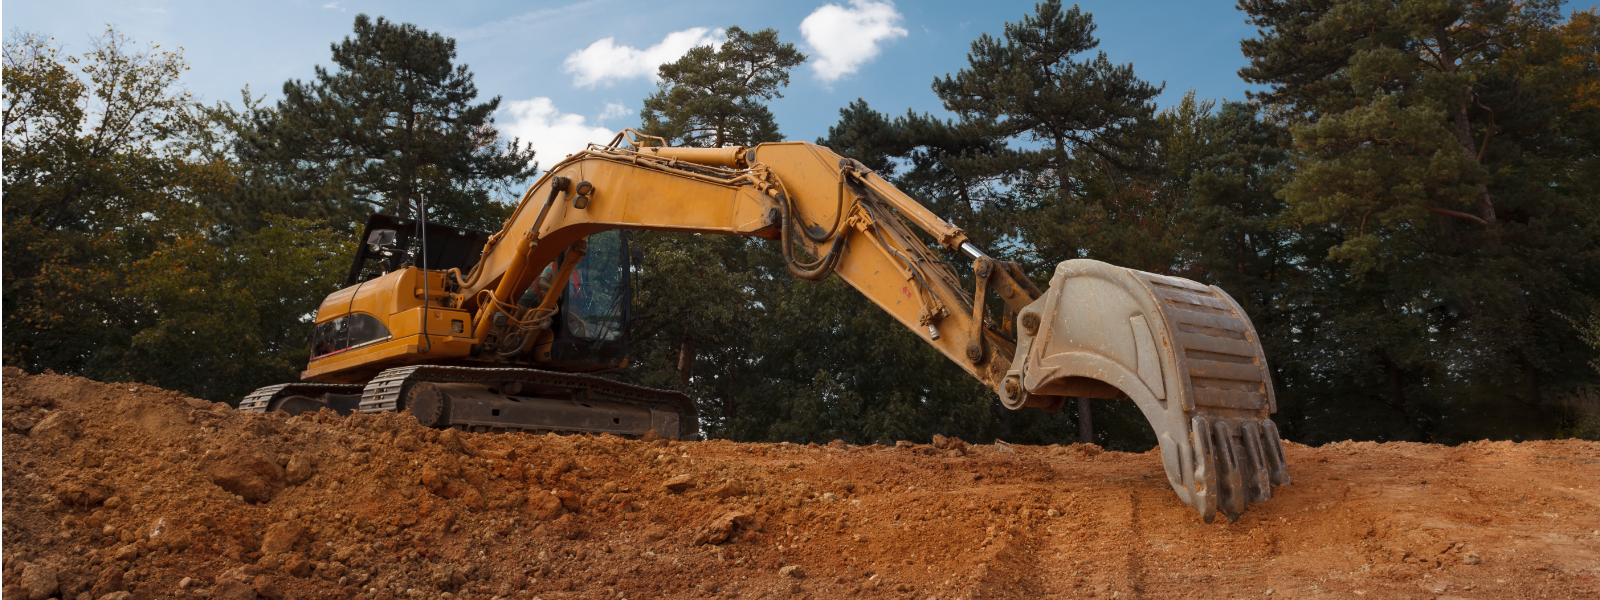 PTTRAKATS OÜ - Excavator, surface analysis, foundation excavation, Levelling, construction of ditches, heavy machinery, t...